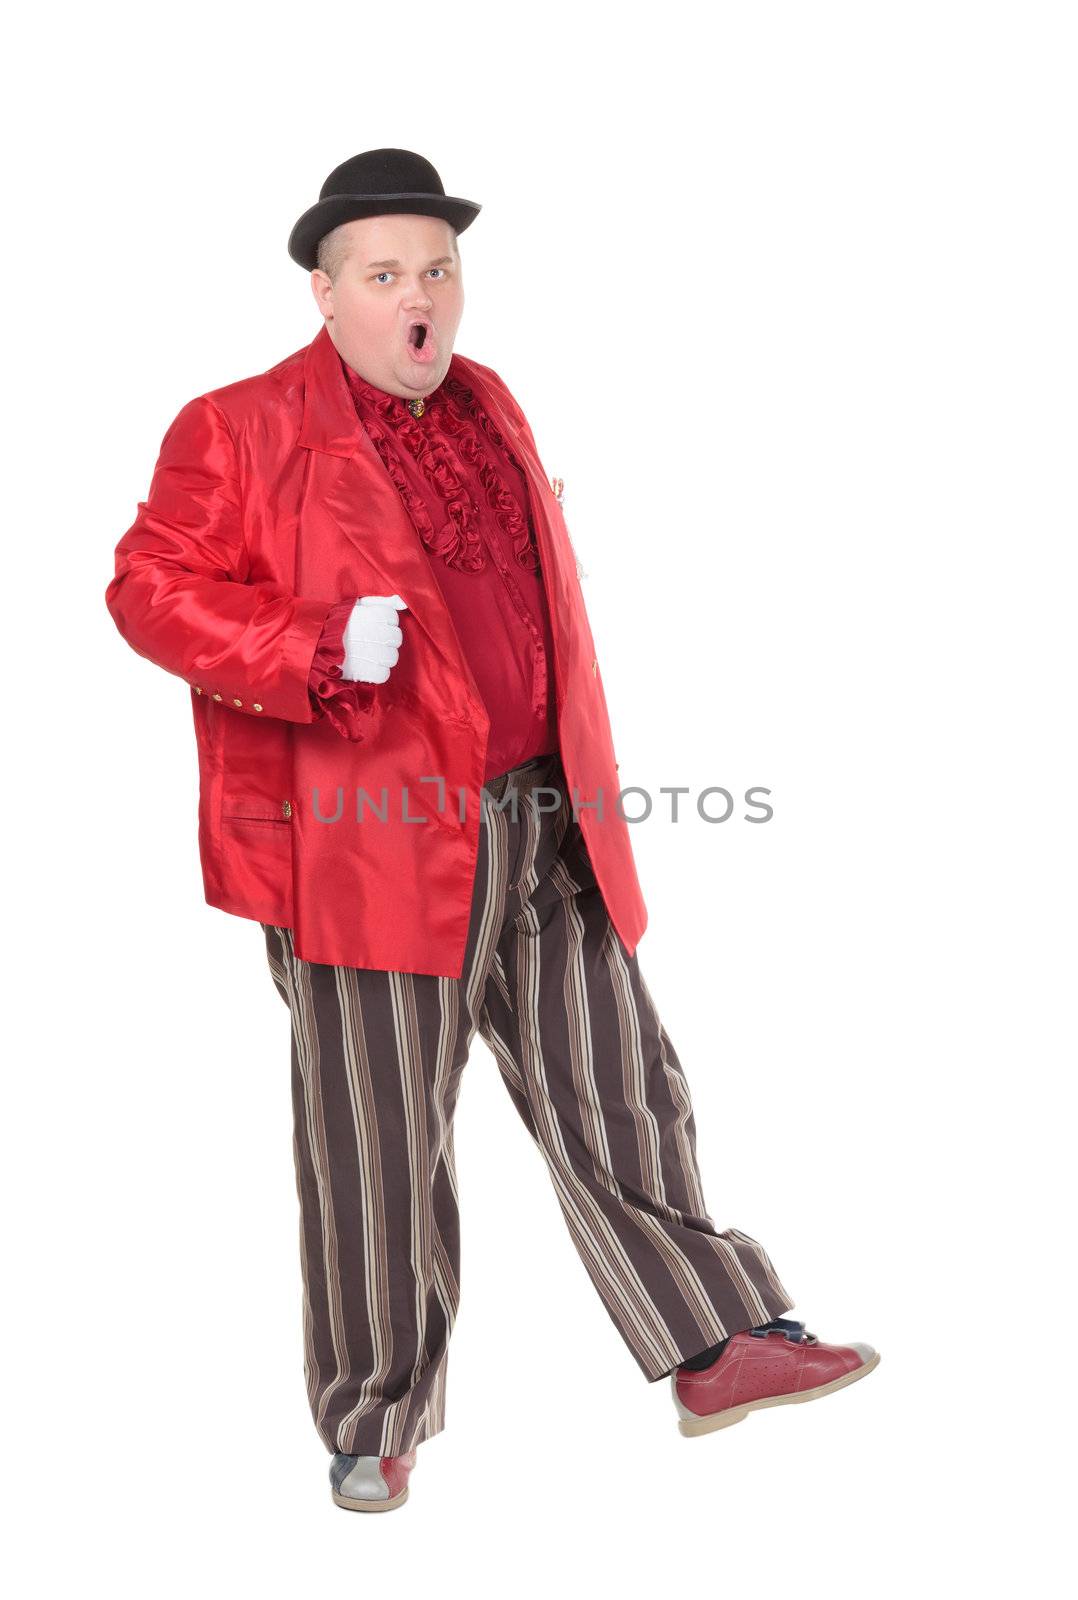 Very fat man in a red entertainer's costume and bowler hat, isolated on white